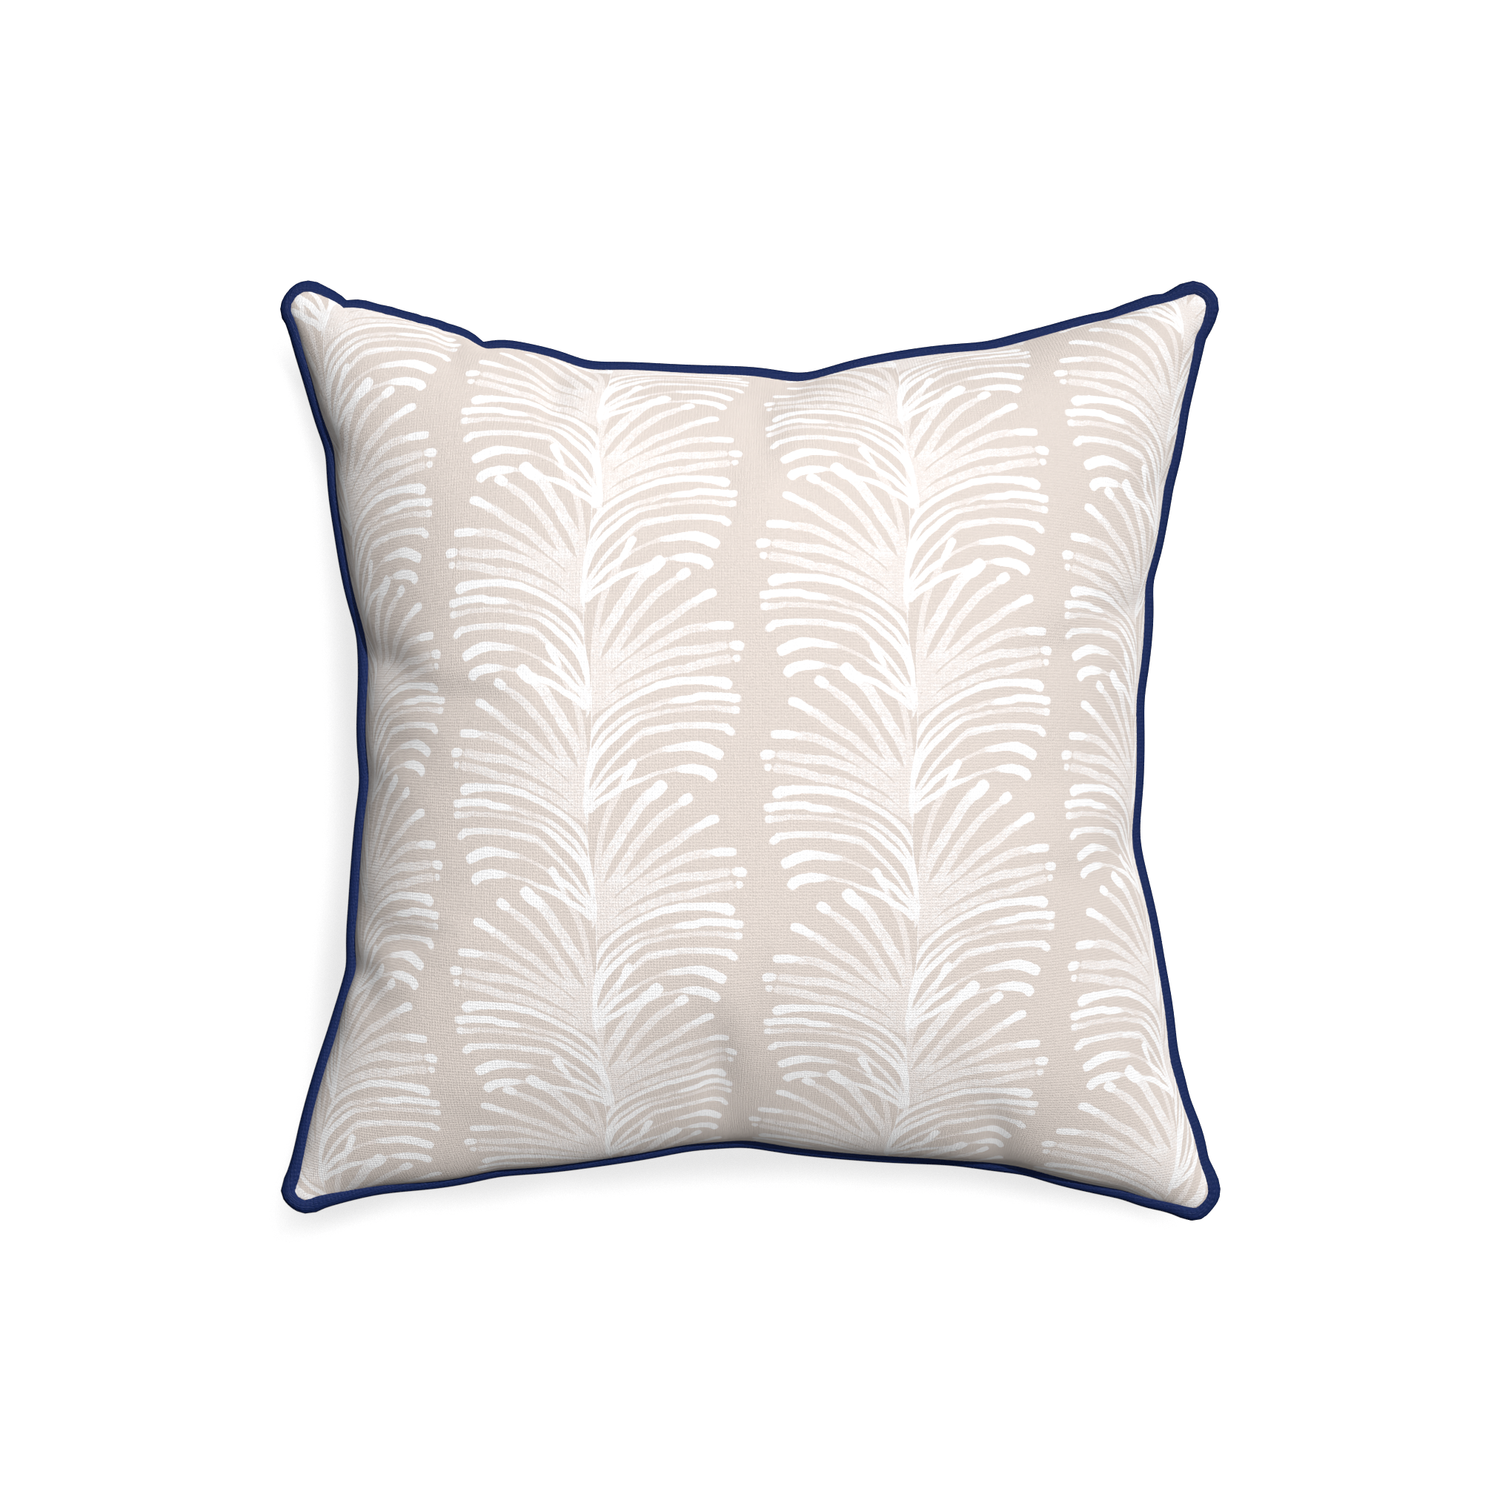 20-square emma sand custom sand colored botanical stripepillow with midnight piping on white background